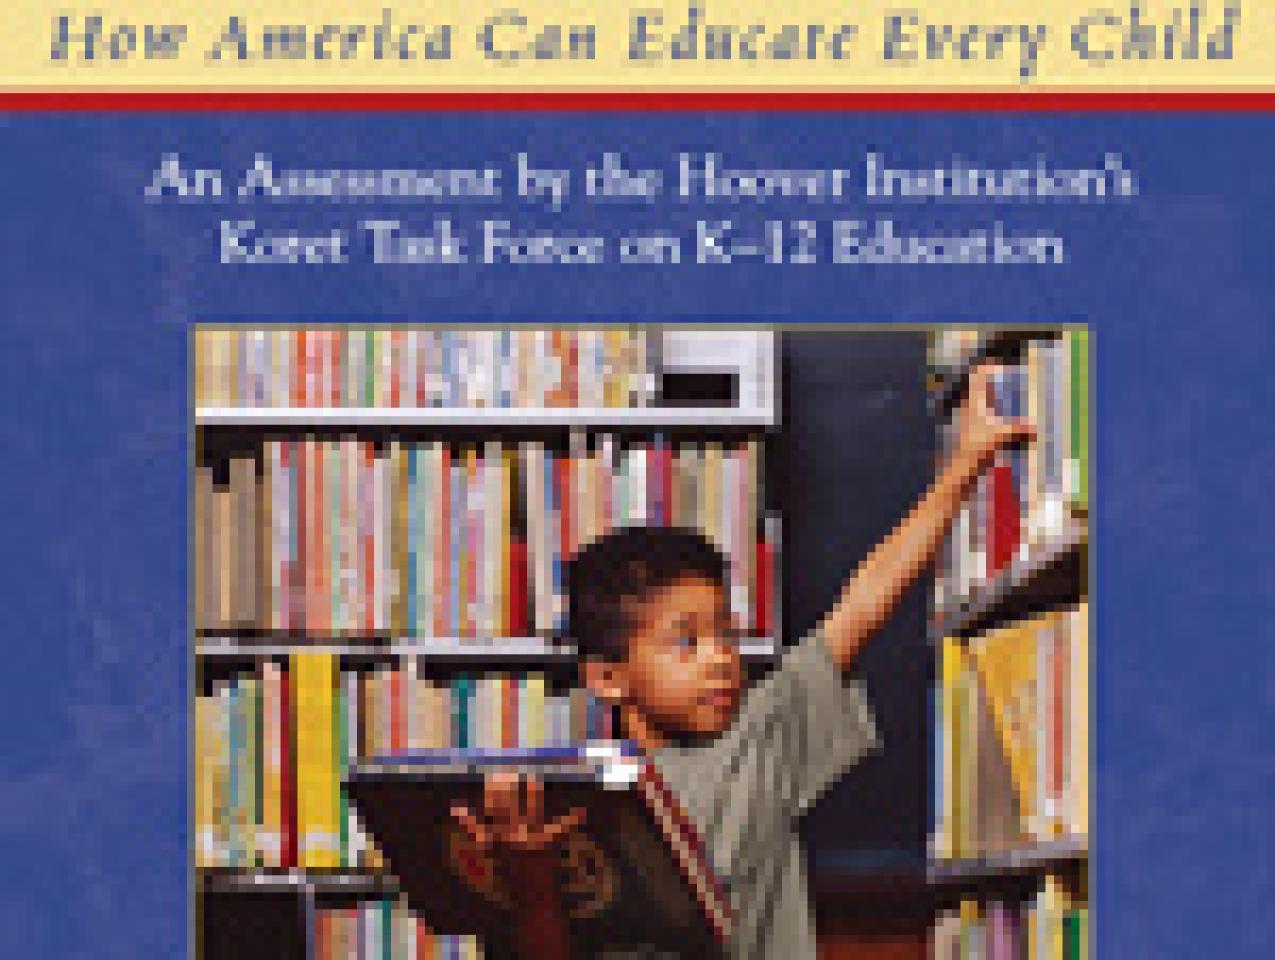 Within Our Reach: How America Can Educate Every Child